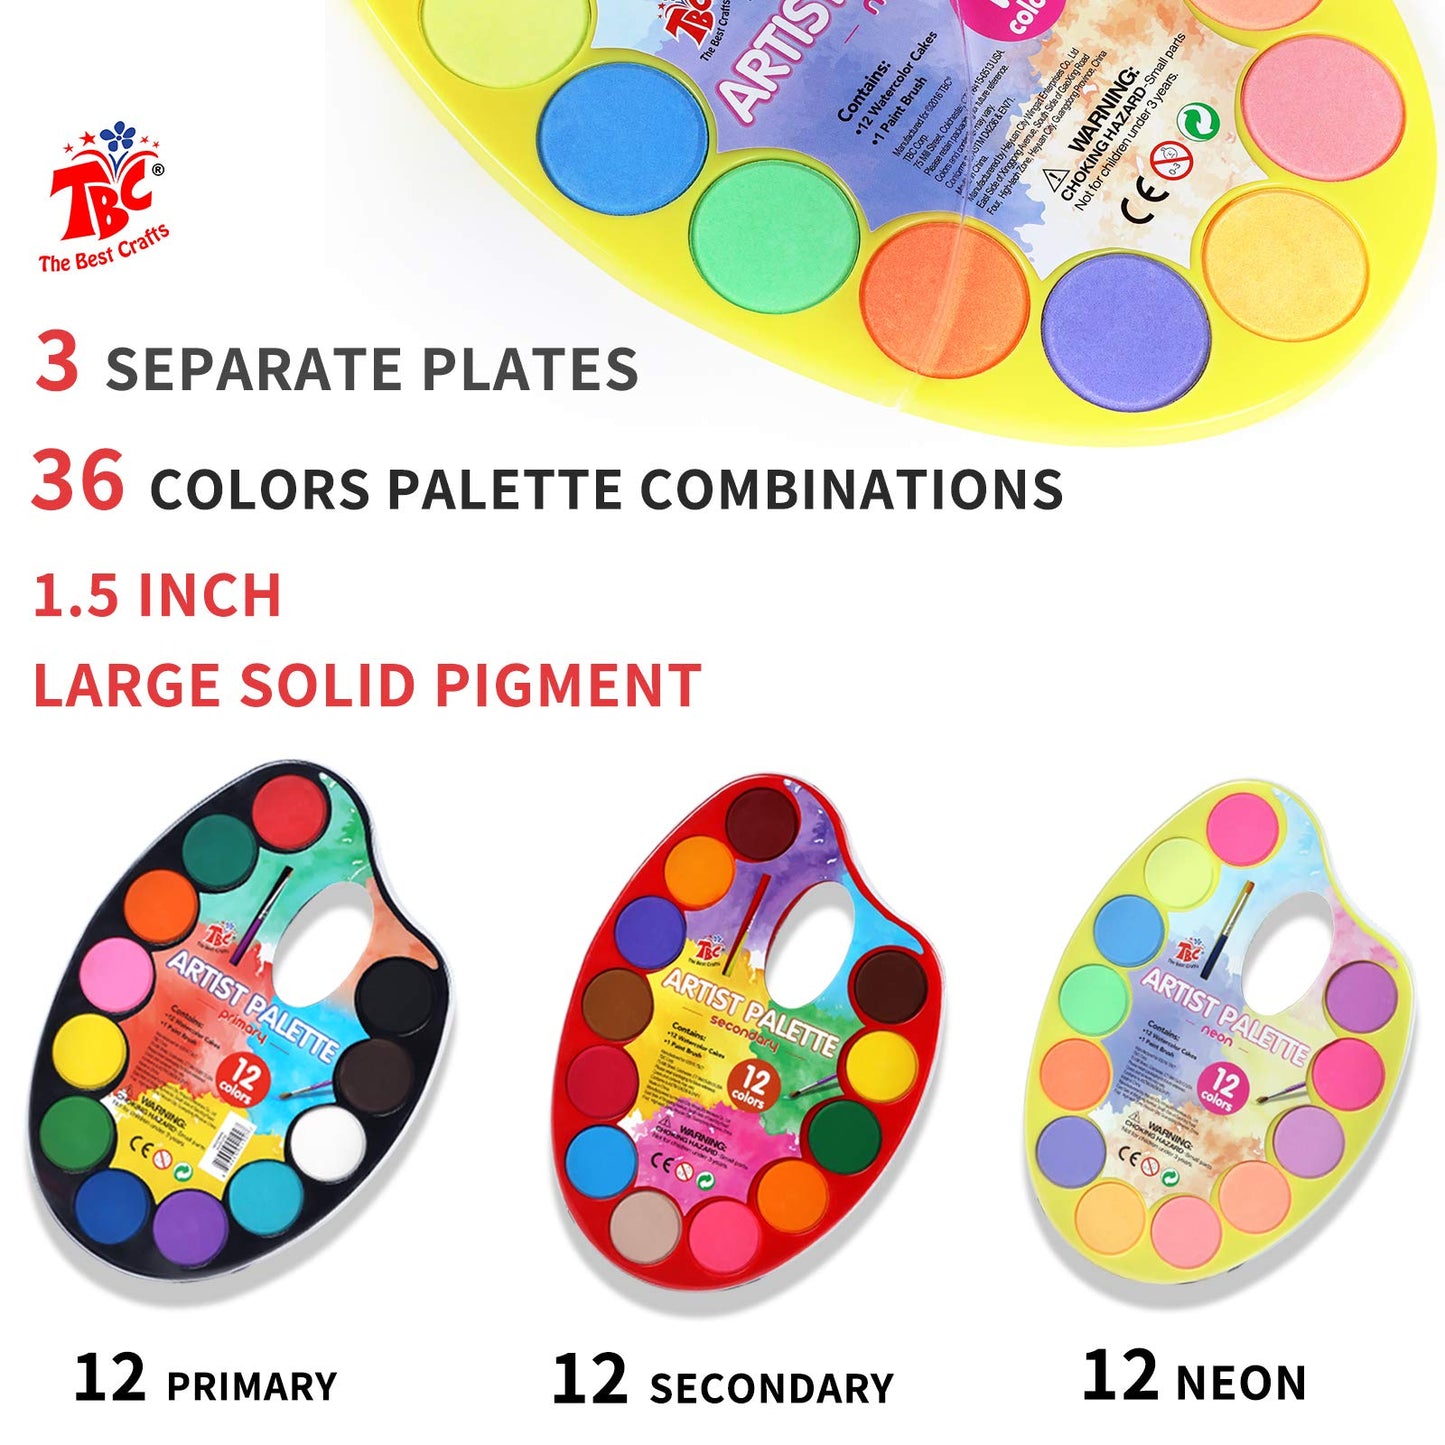 TBC The Best Crafts Watercolor Paint Set,36 Vibrant Water Color With 3 Individual Pallet,Non-Toxic and Washable